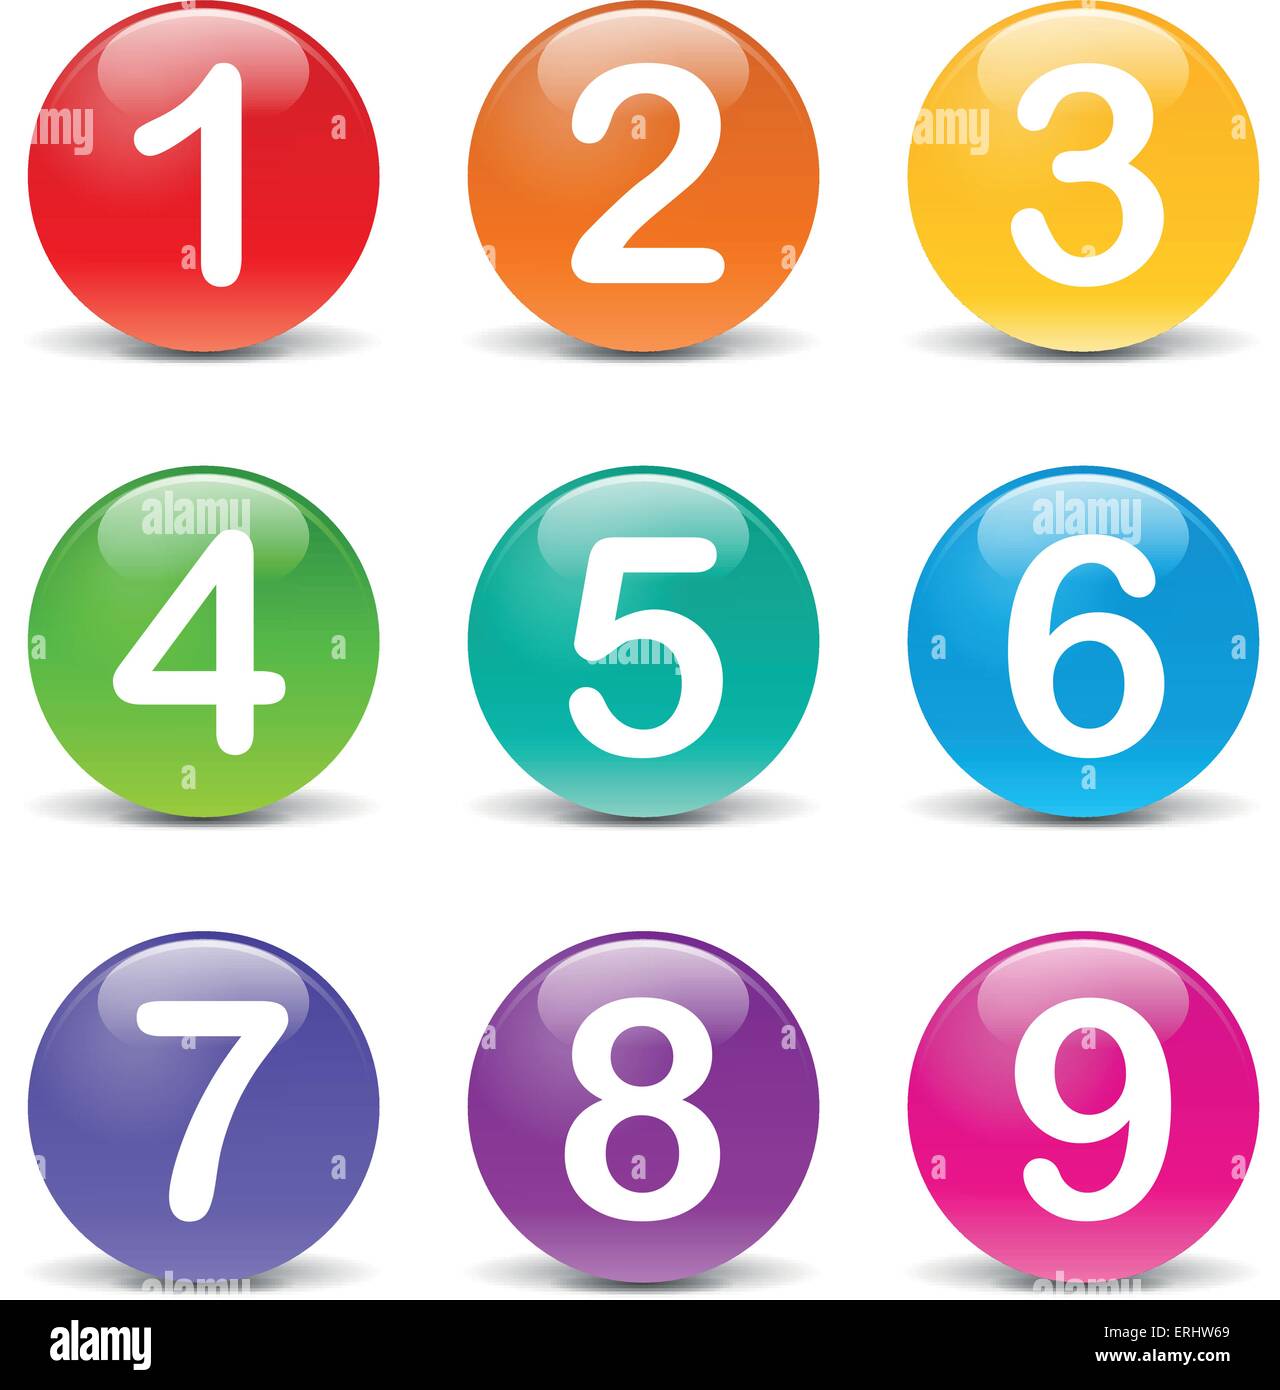 Numbers Circles One Two Three Four Stock Illustration 10691629